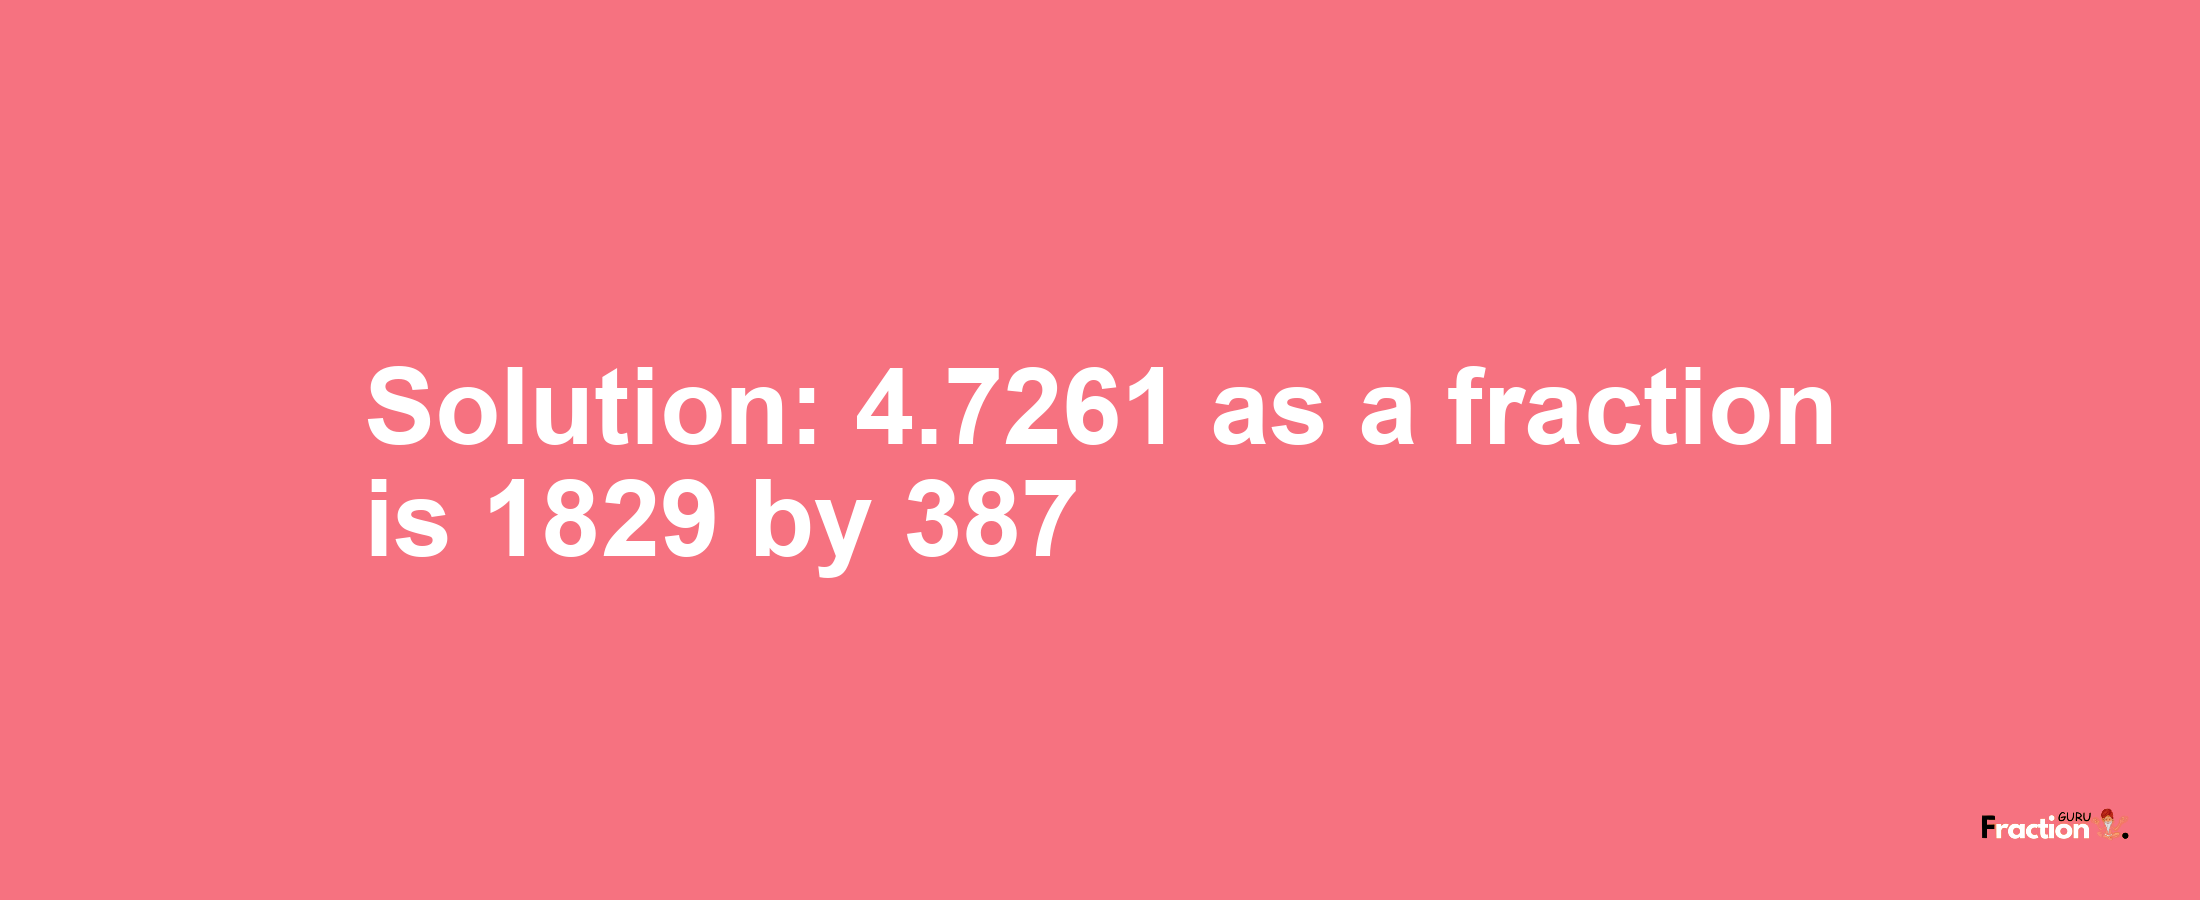 Solution:4.7261 as a fraction is 1829/387